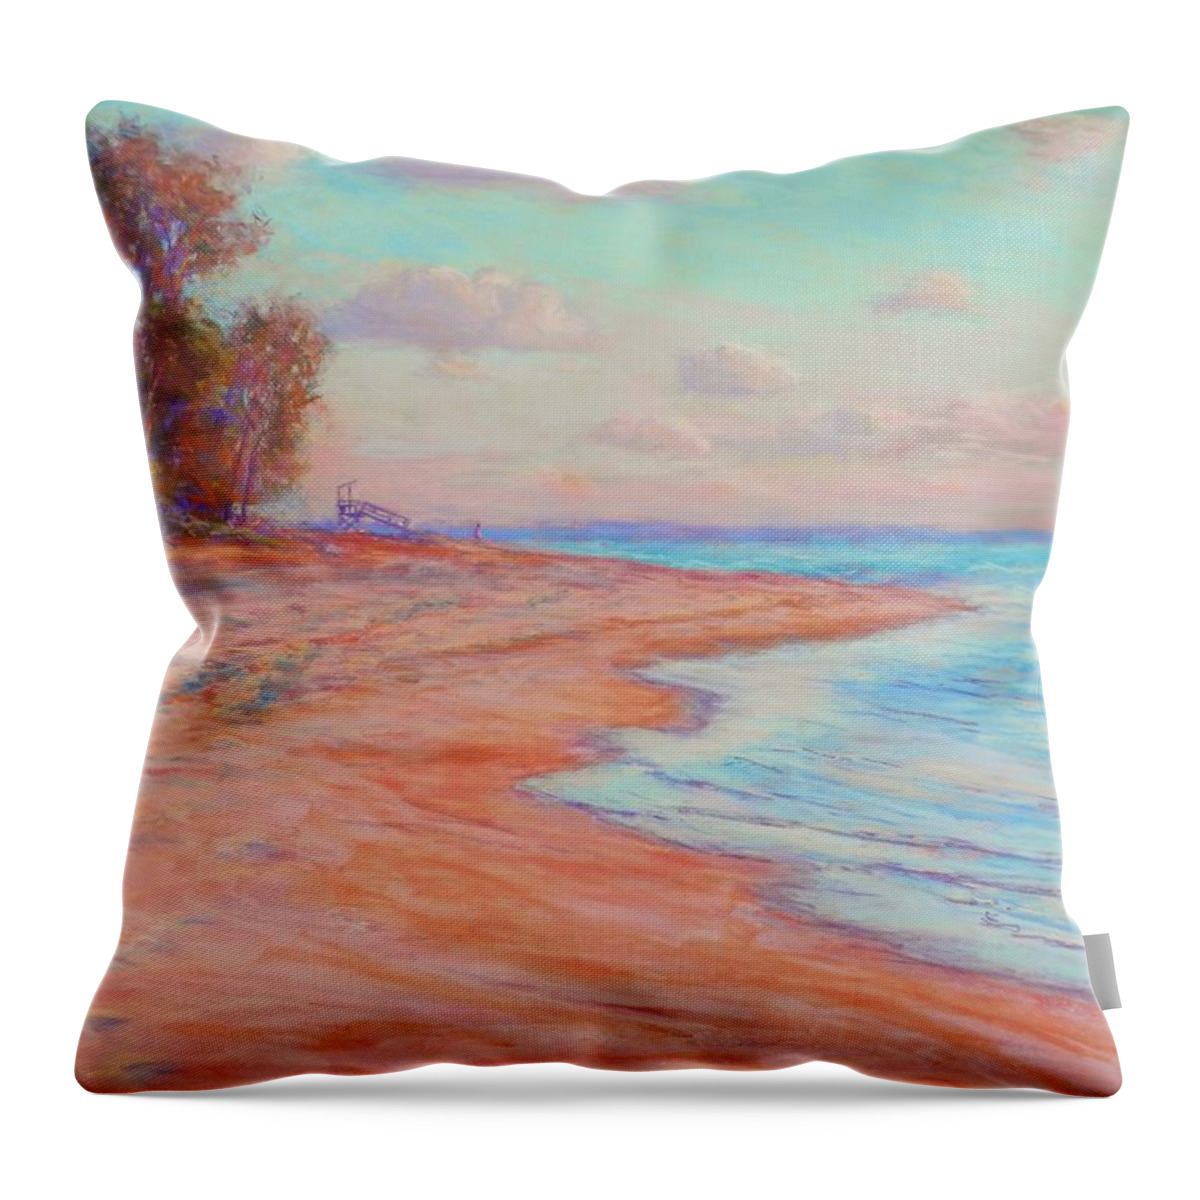 Water Throw Pillow featuring the painting A Summer Evening by Michael Camp